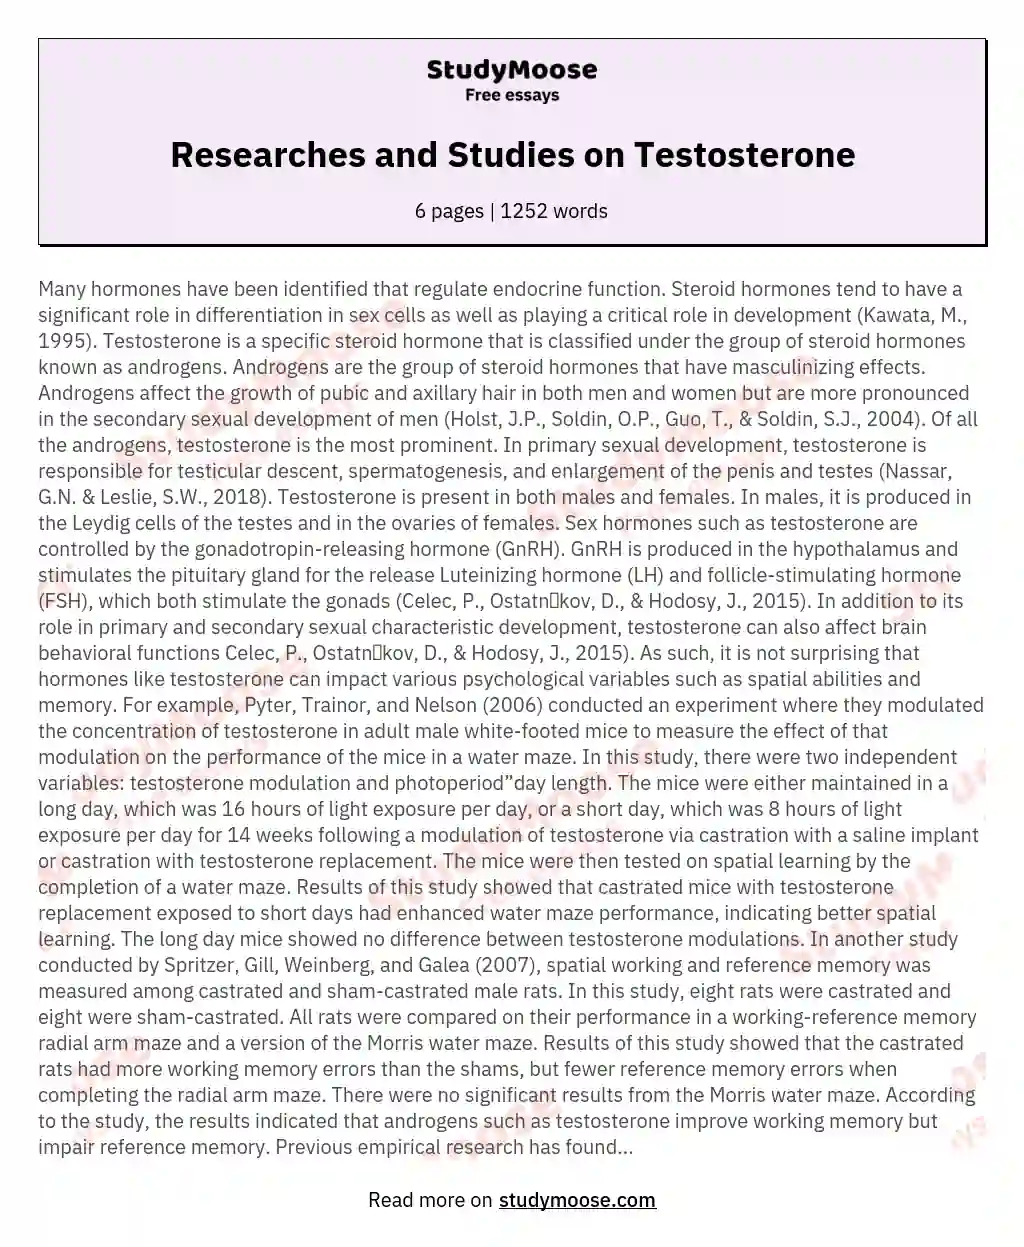 Researches and Studies on Testosterone essay